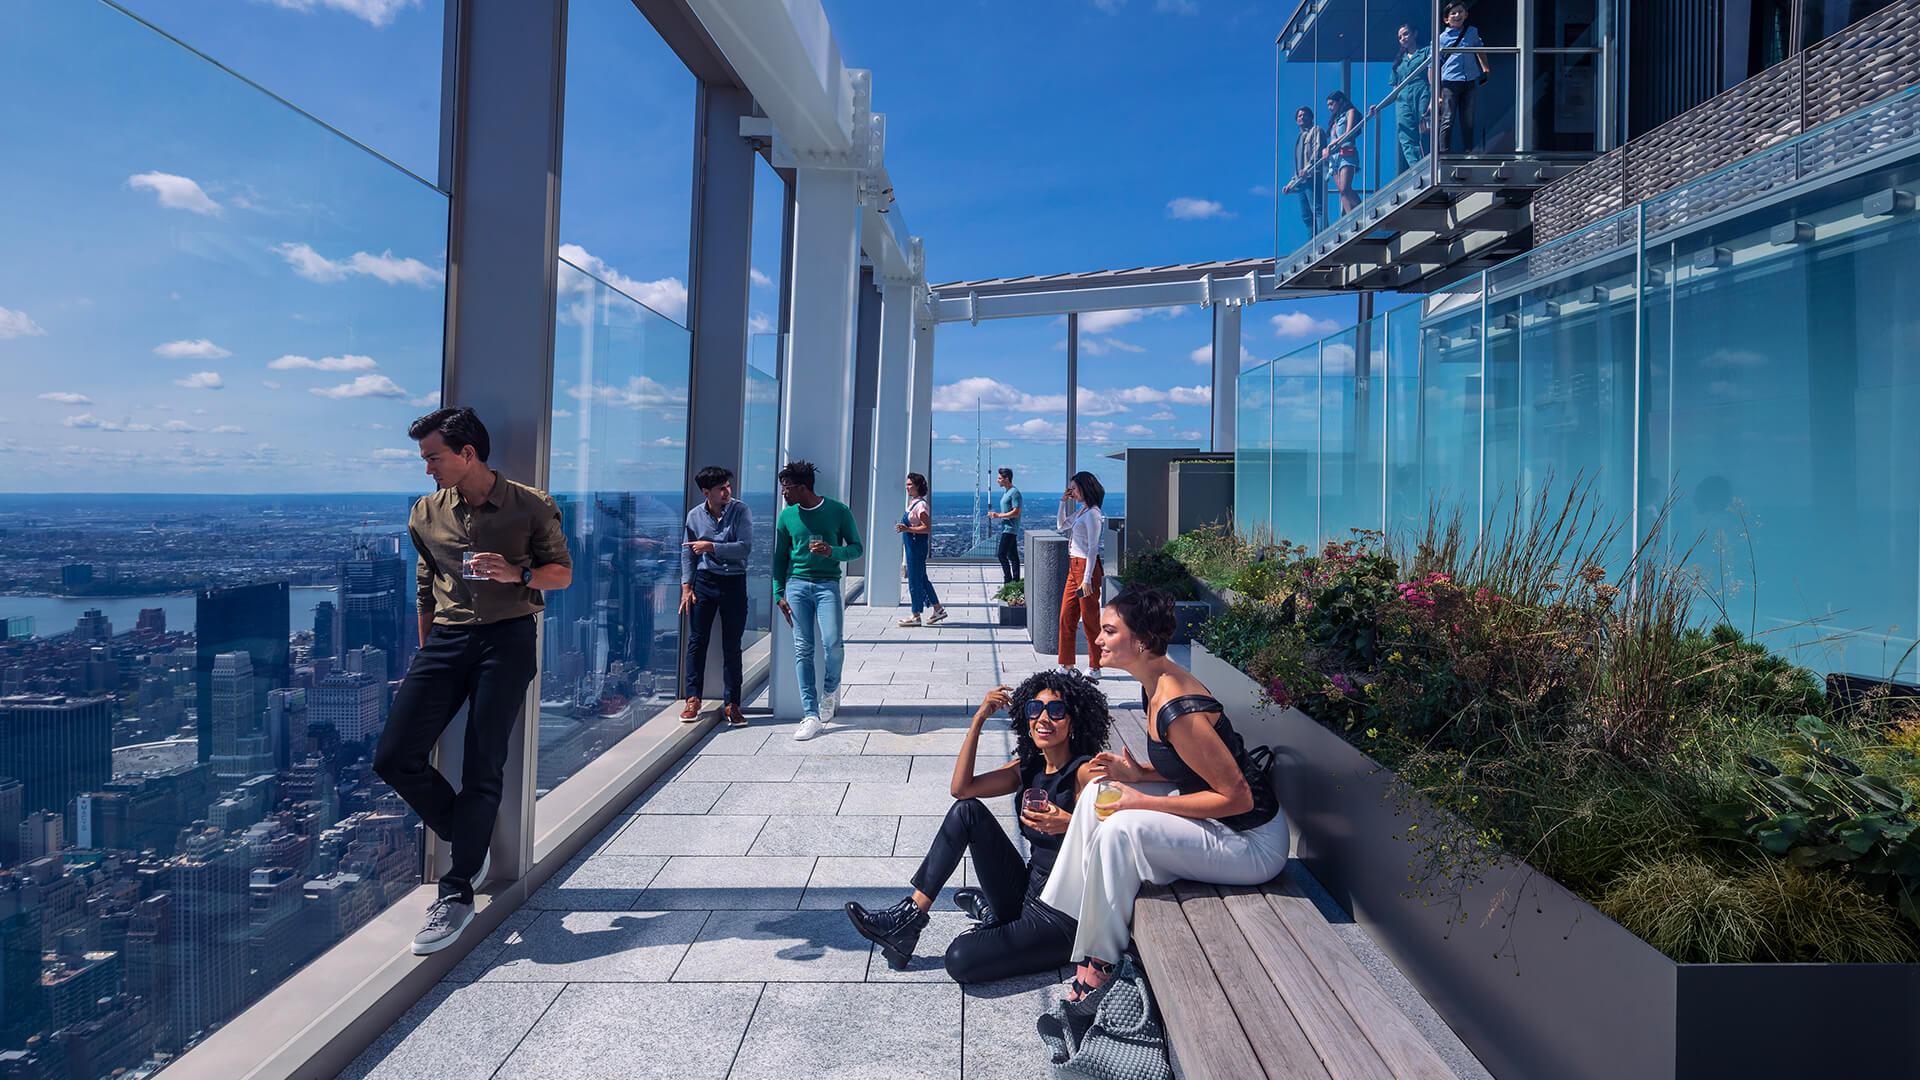 Guests taking in the view from a wrap-around outdoor rooftop terrace in NYC.